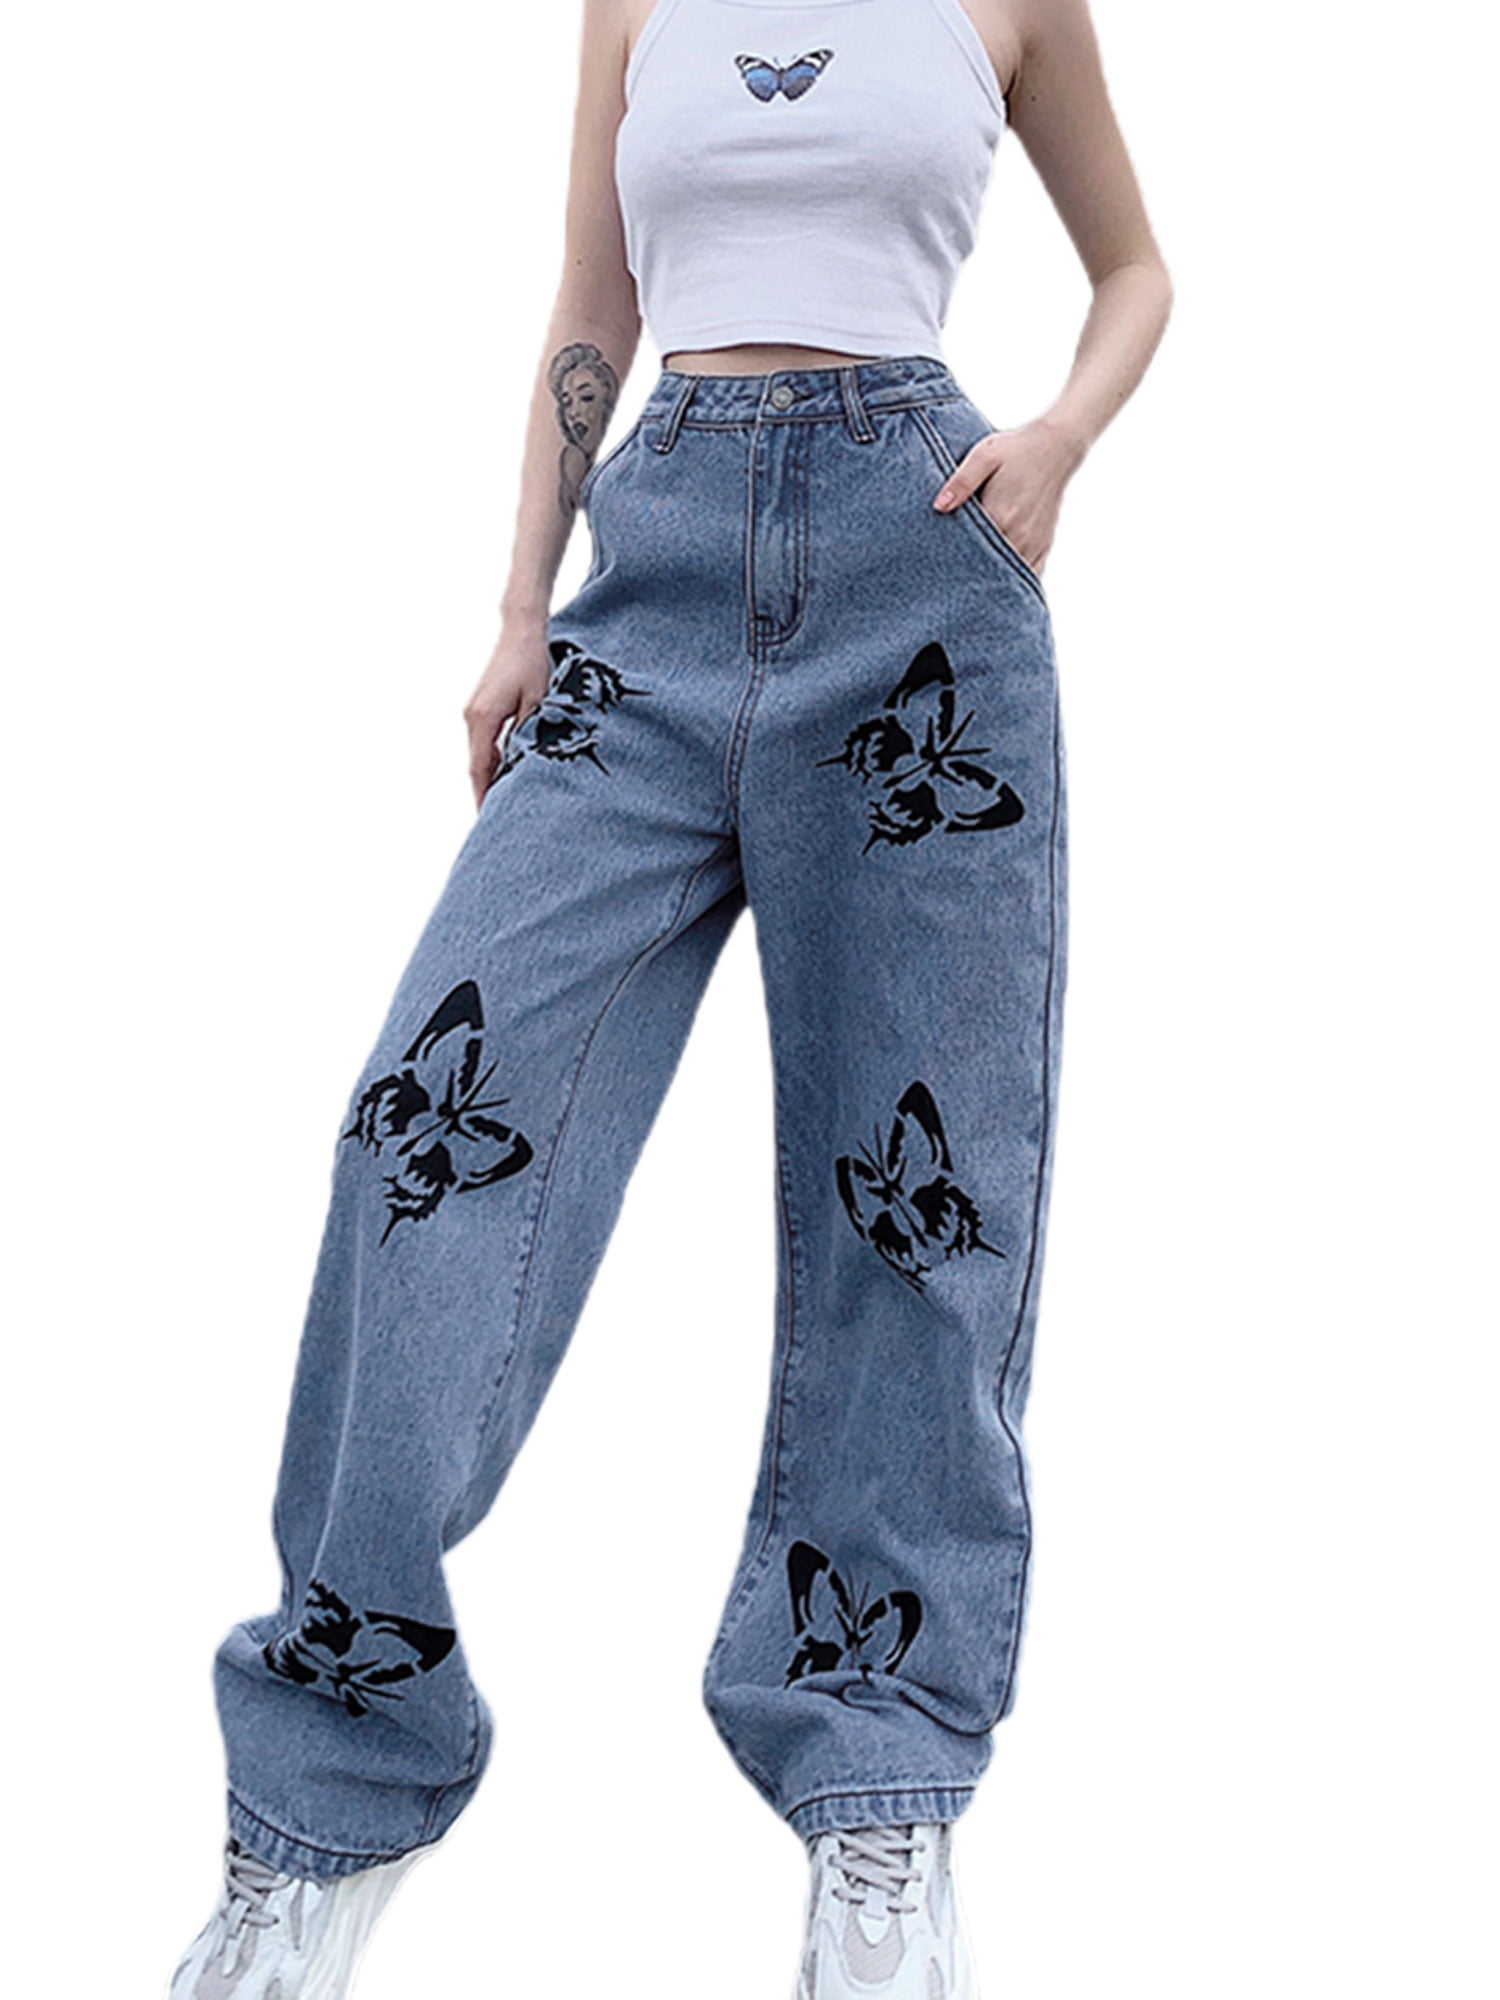 xiaohuoban Women Casual Loose Fit Bootcut Jeans Wide Straight Leg Pants 